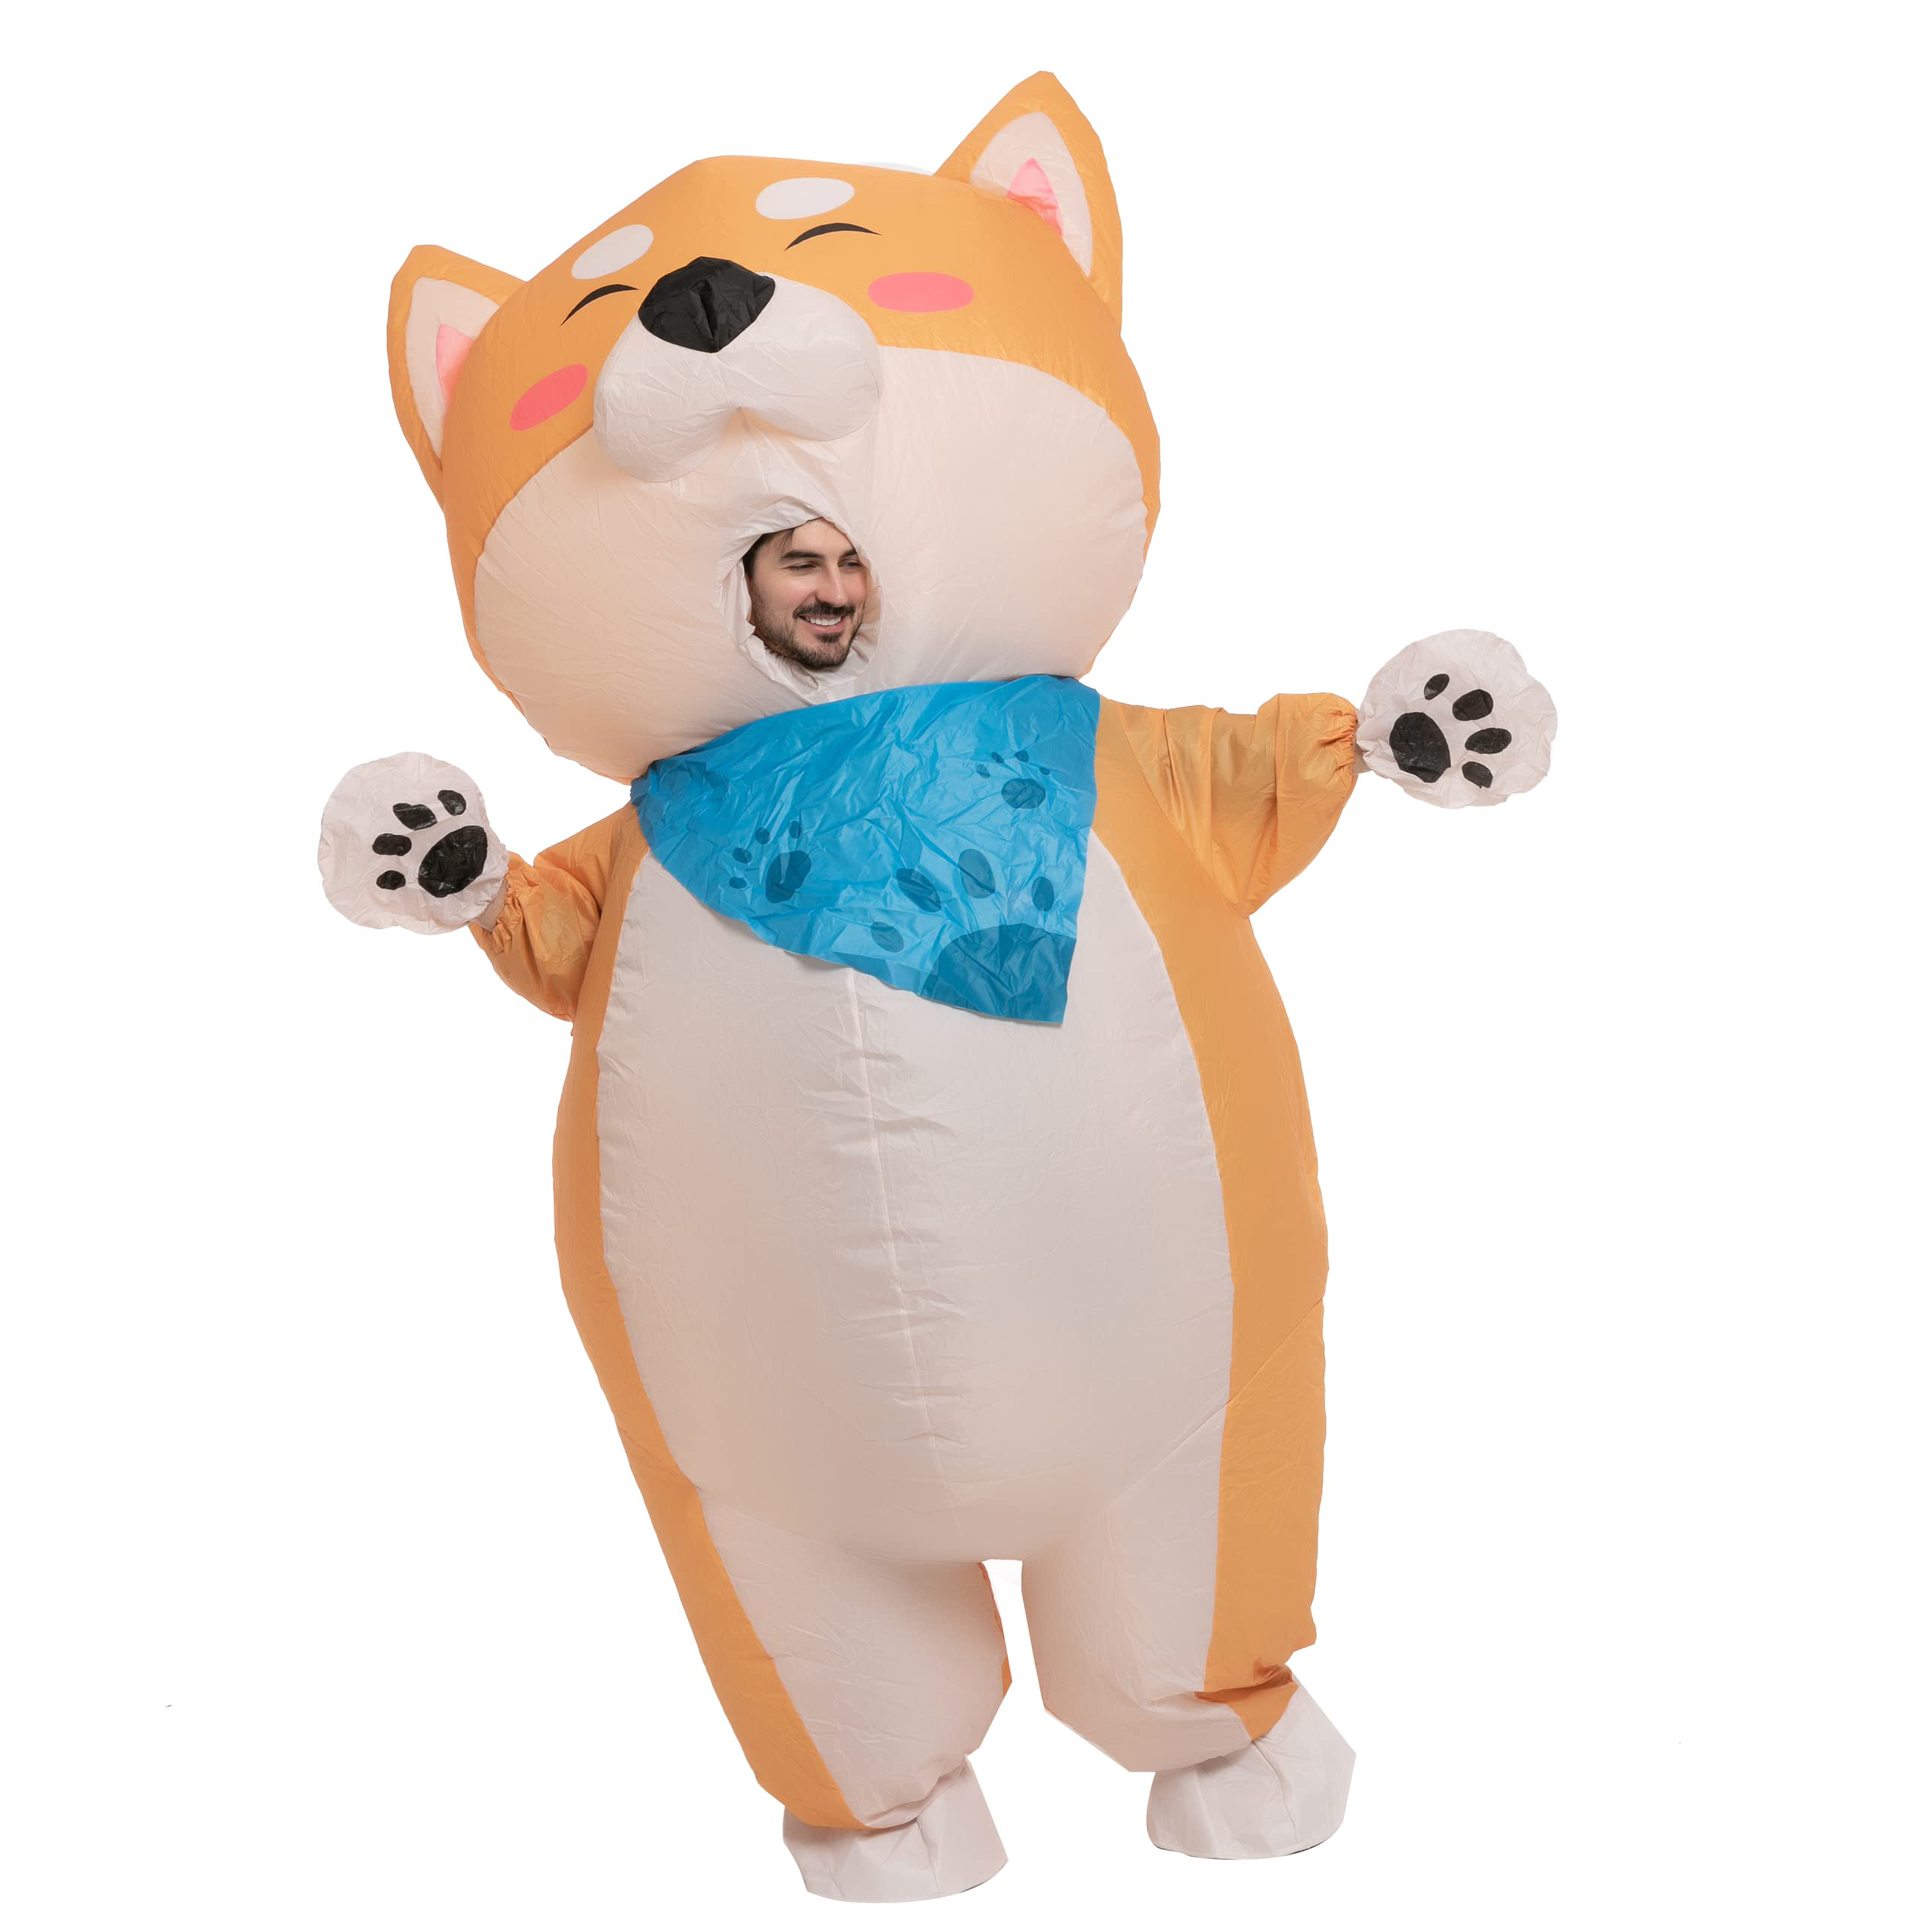 Children's Cartoon Dog Inflatable Costume - Fun and Playful Outfit for Children's Day Party, Gatherings, and Performances